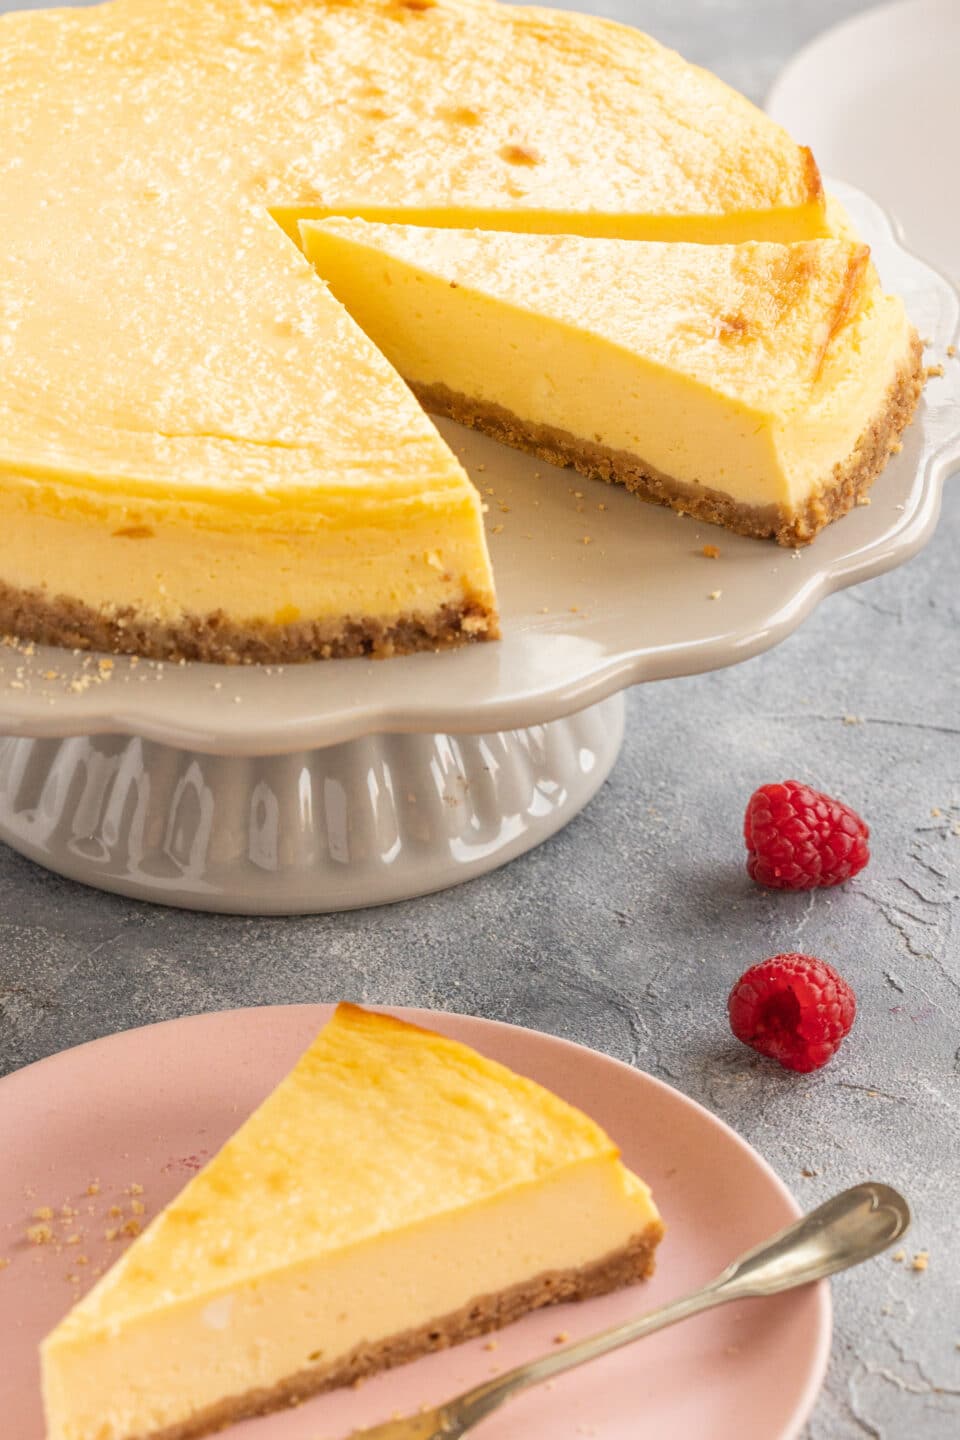 creamy and compact cheesecake